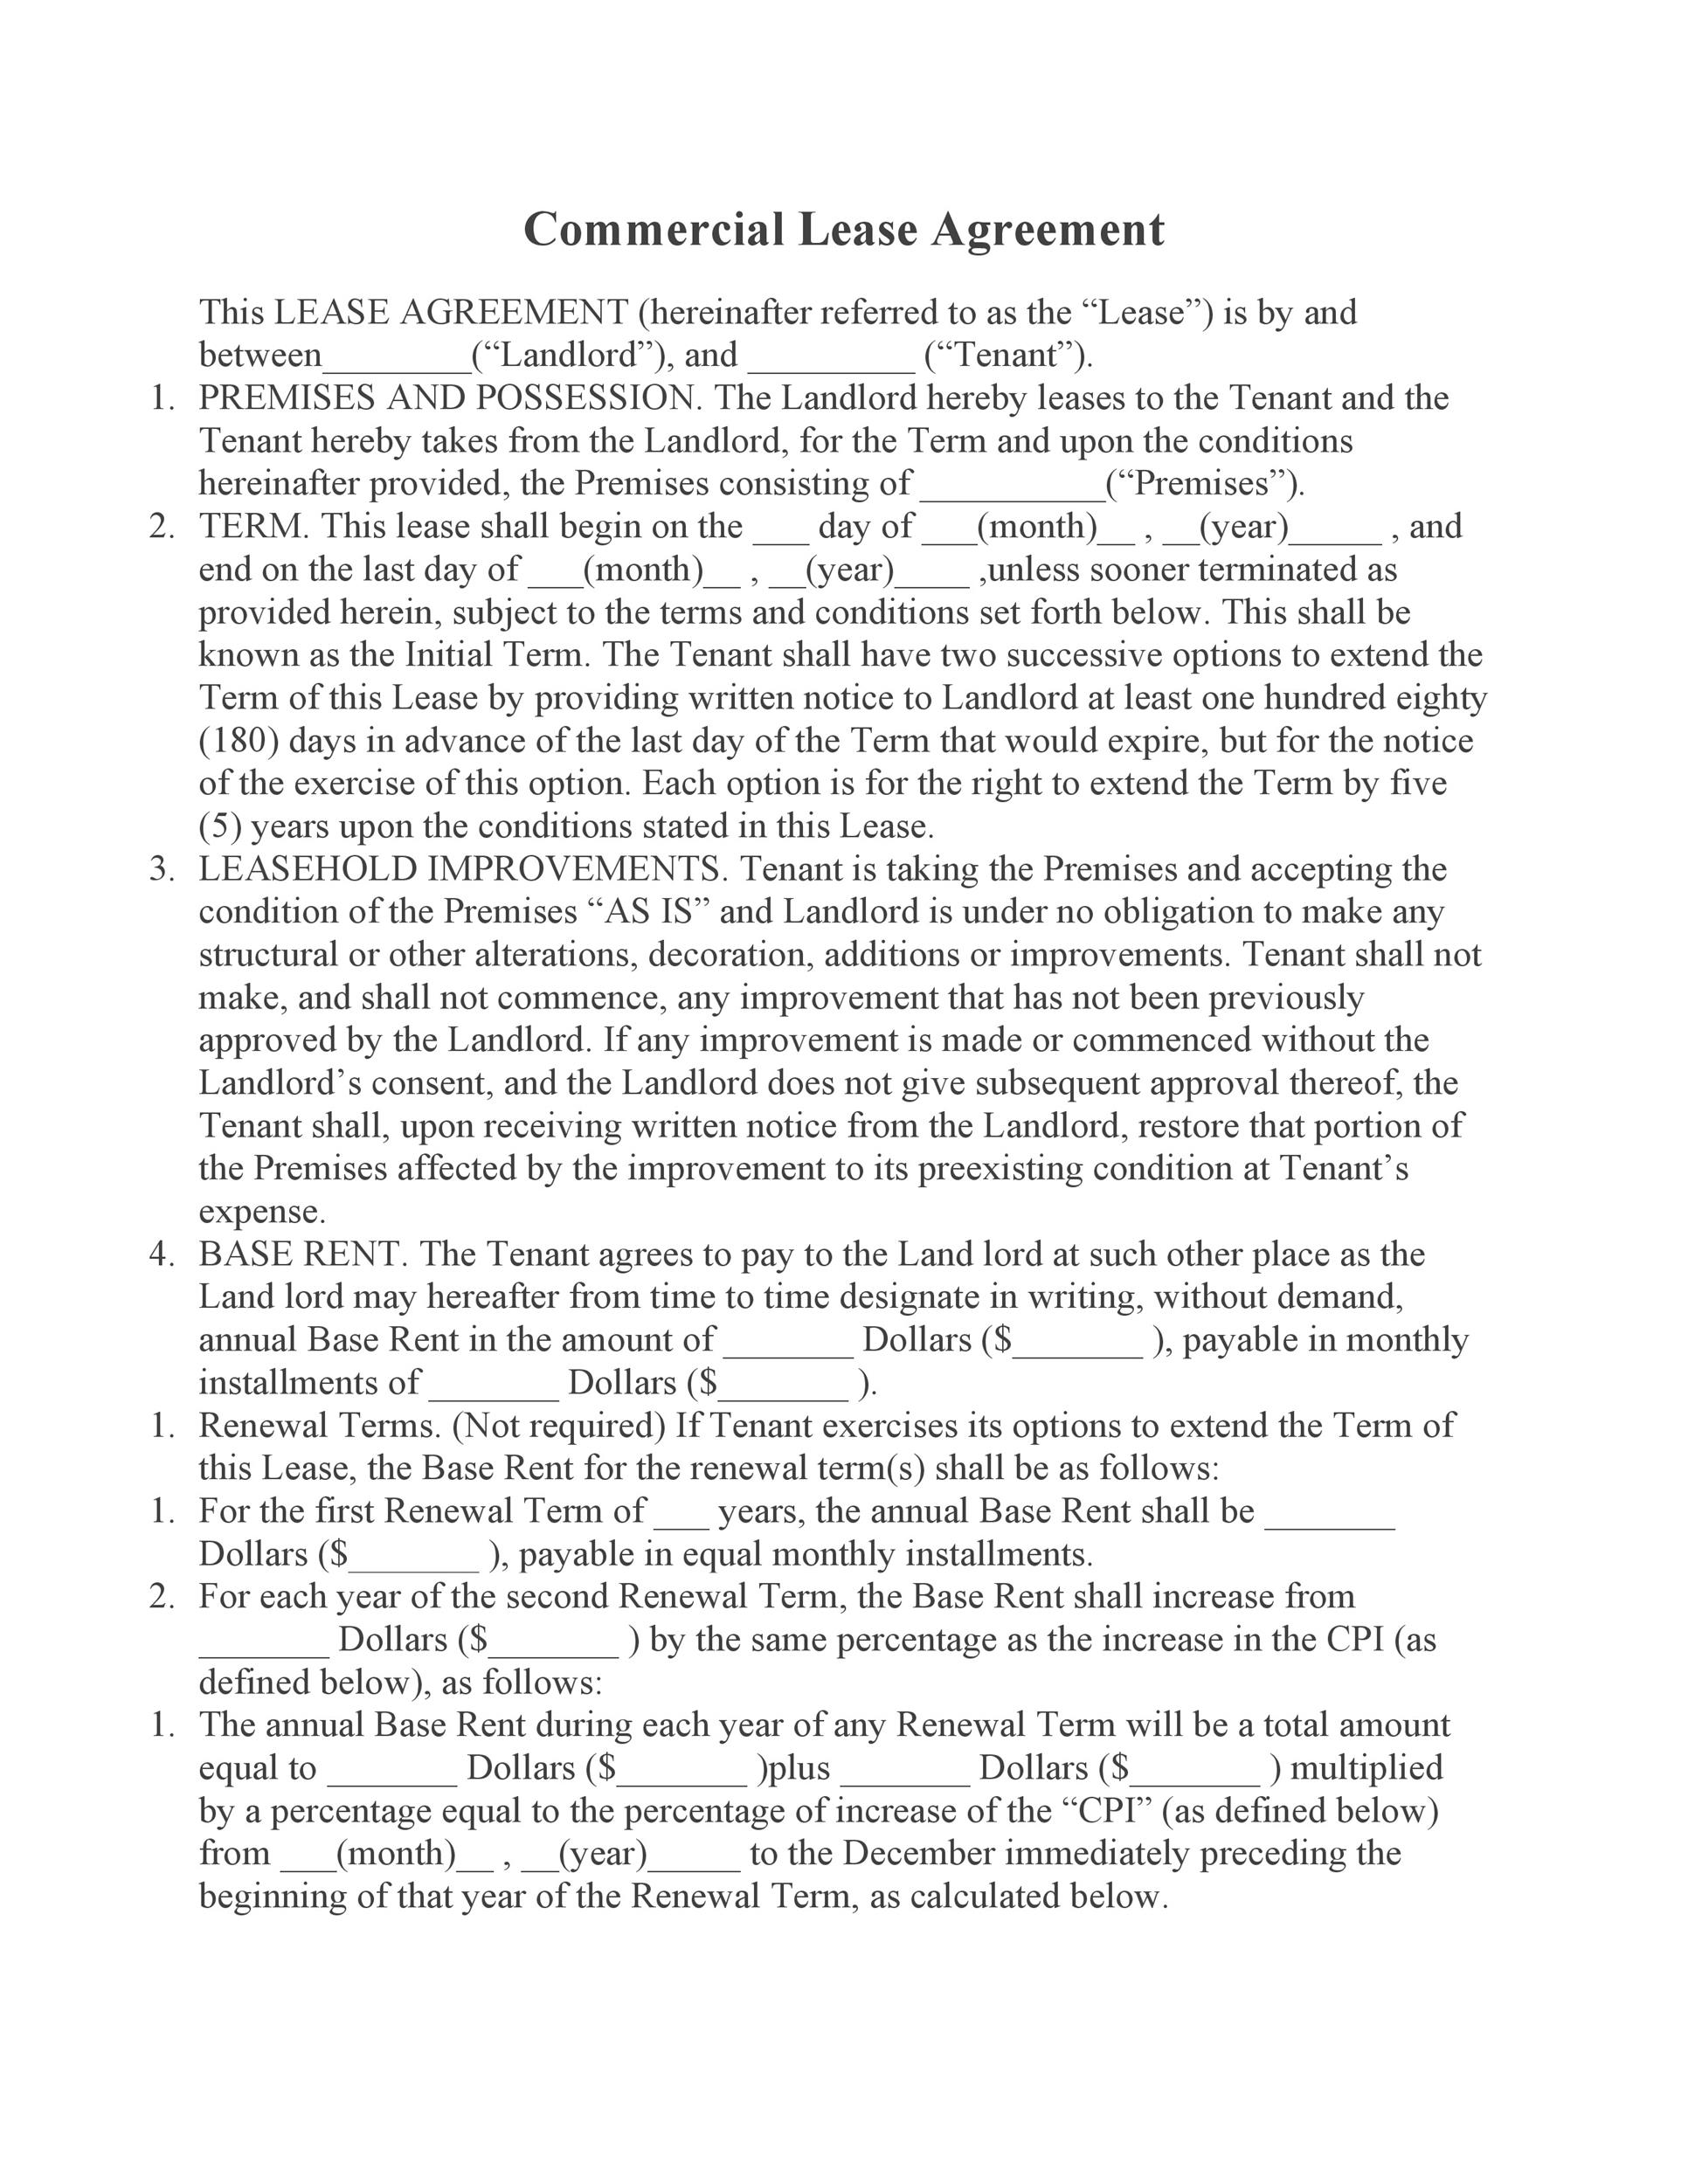 Free Commercial Lease Agreement Template 20